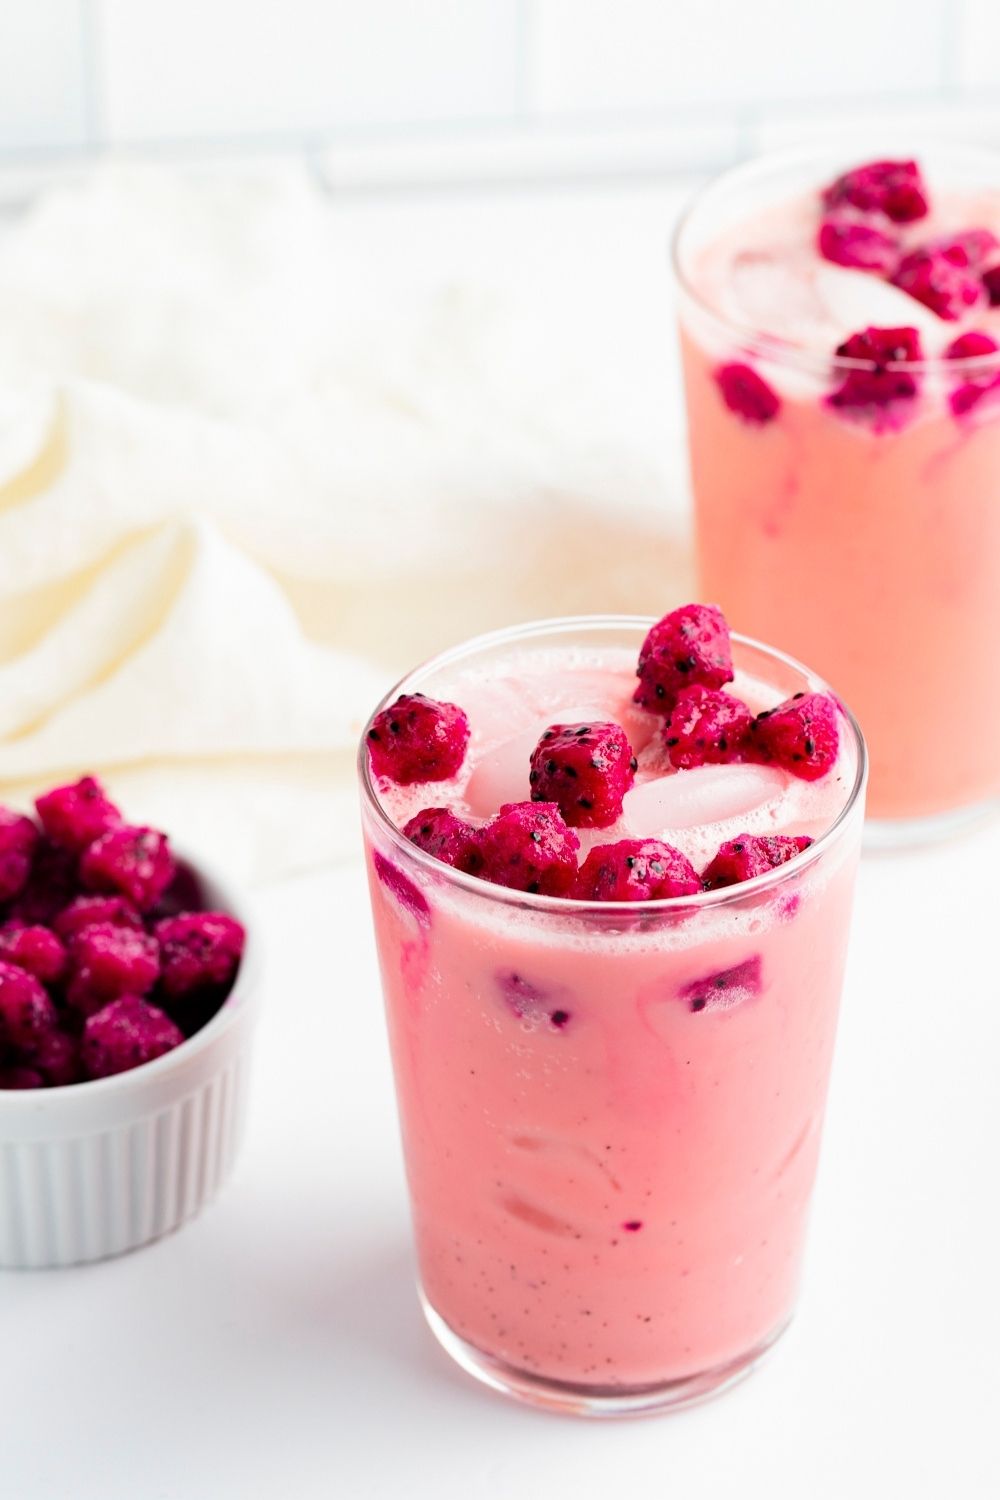 Starbucks Dragon Drink (Copycat Recipe) featuring Two Glasses of Homemade Starbucks Pink Dragon Drink in a Tall Glass with a Dish of Fresh Dragon Fruit Cubes to the Side